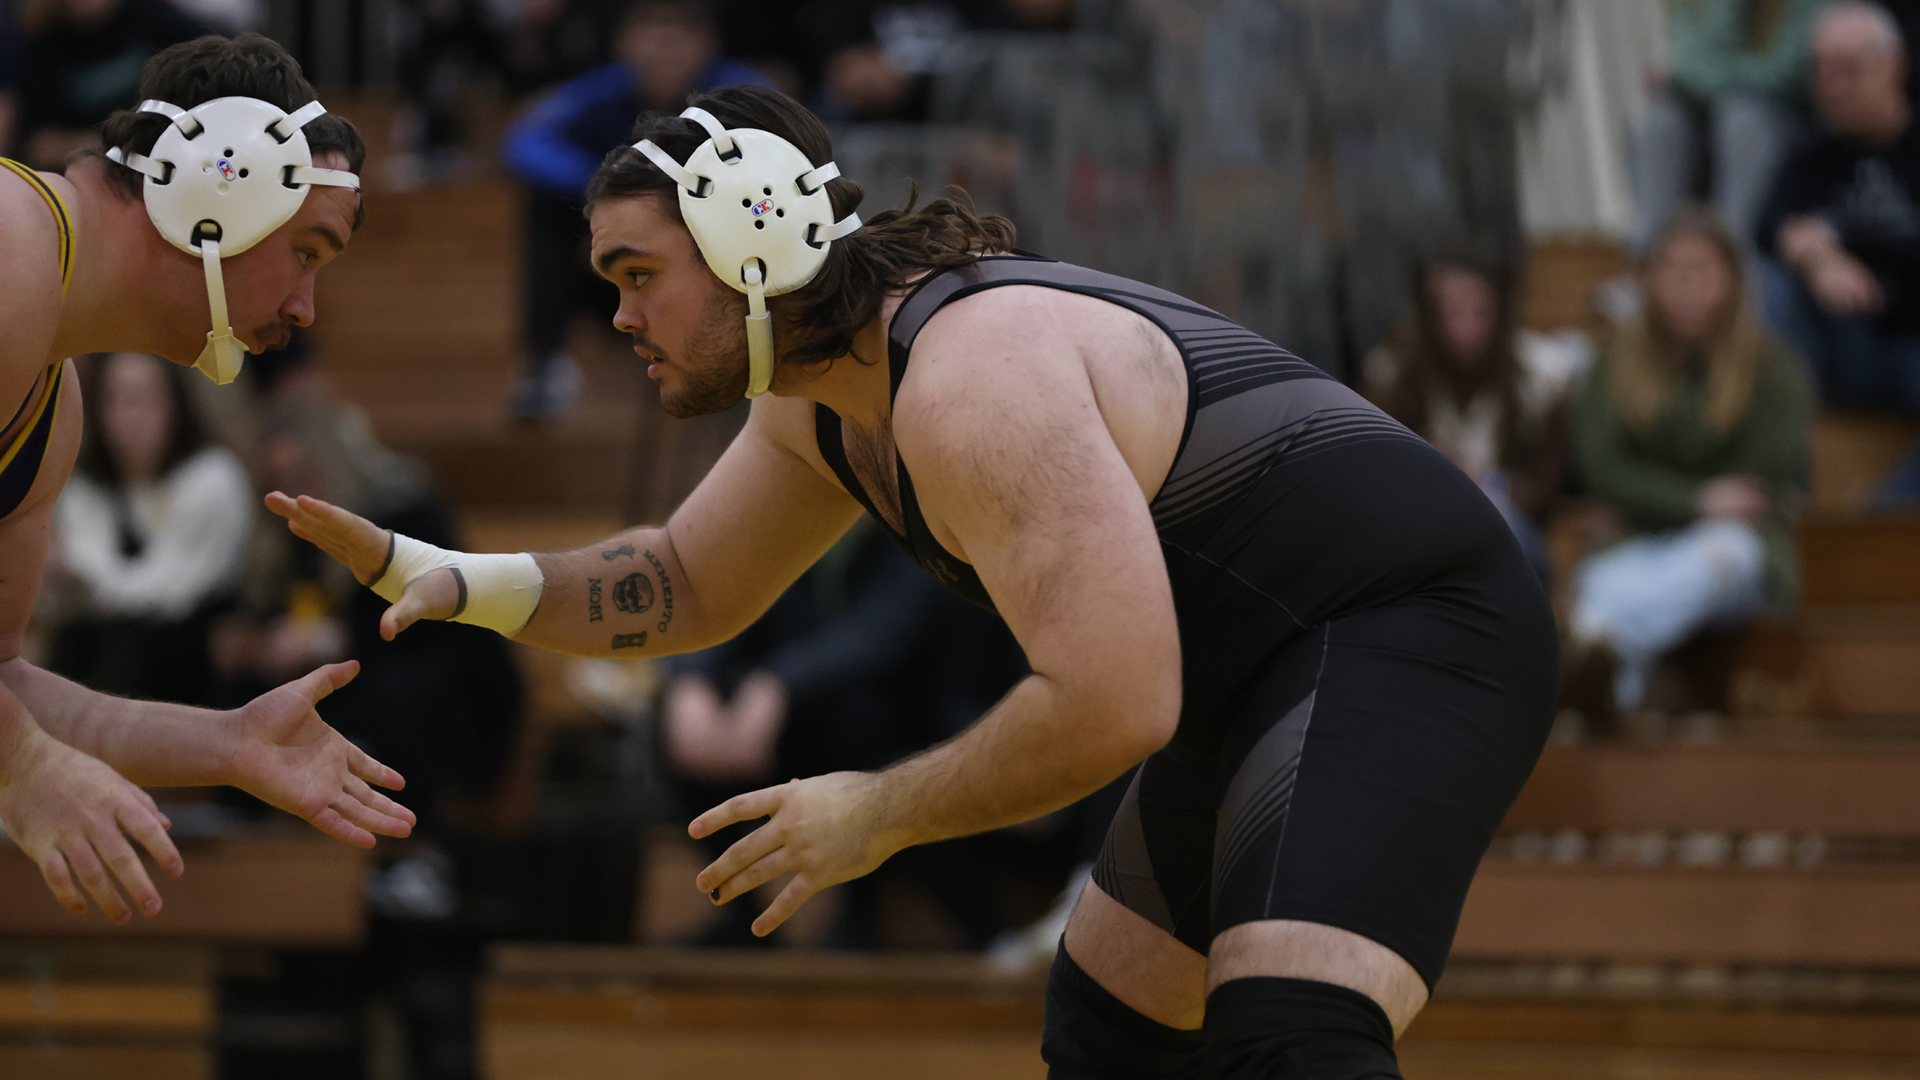 Camden Harms pinned his Warhawk opponent in 2:52 to score the Titans' only points on Saturday